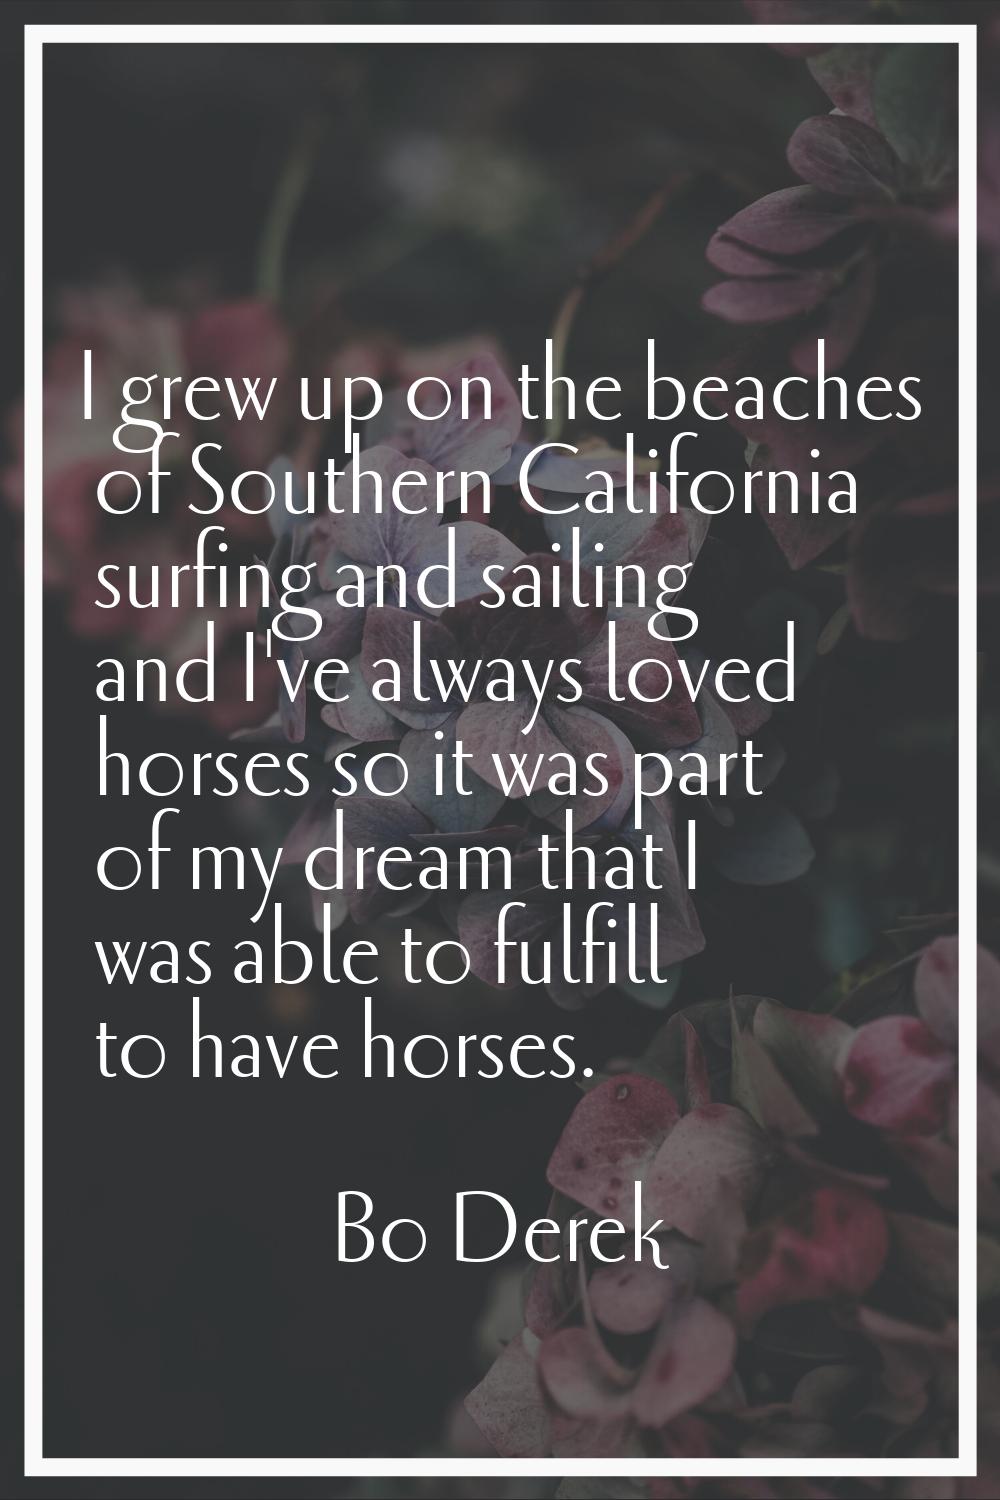 I grew up on the beaches of Southern California surfing and sailing and I've always loved horses so